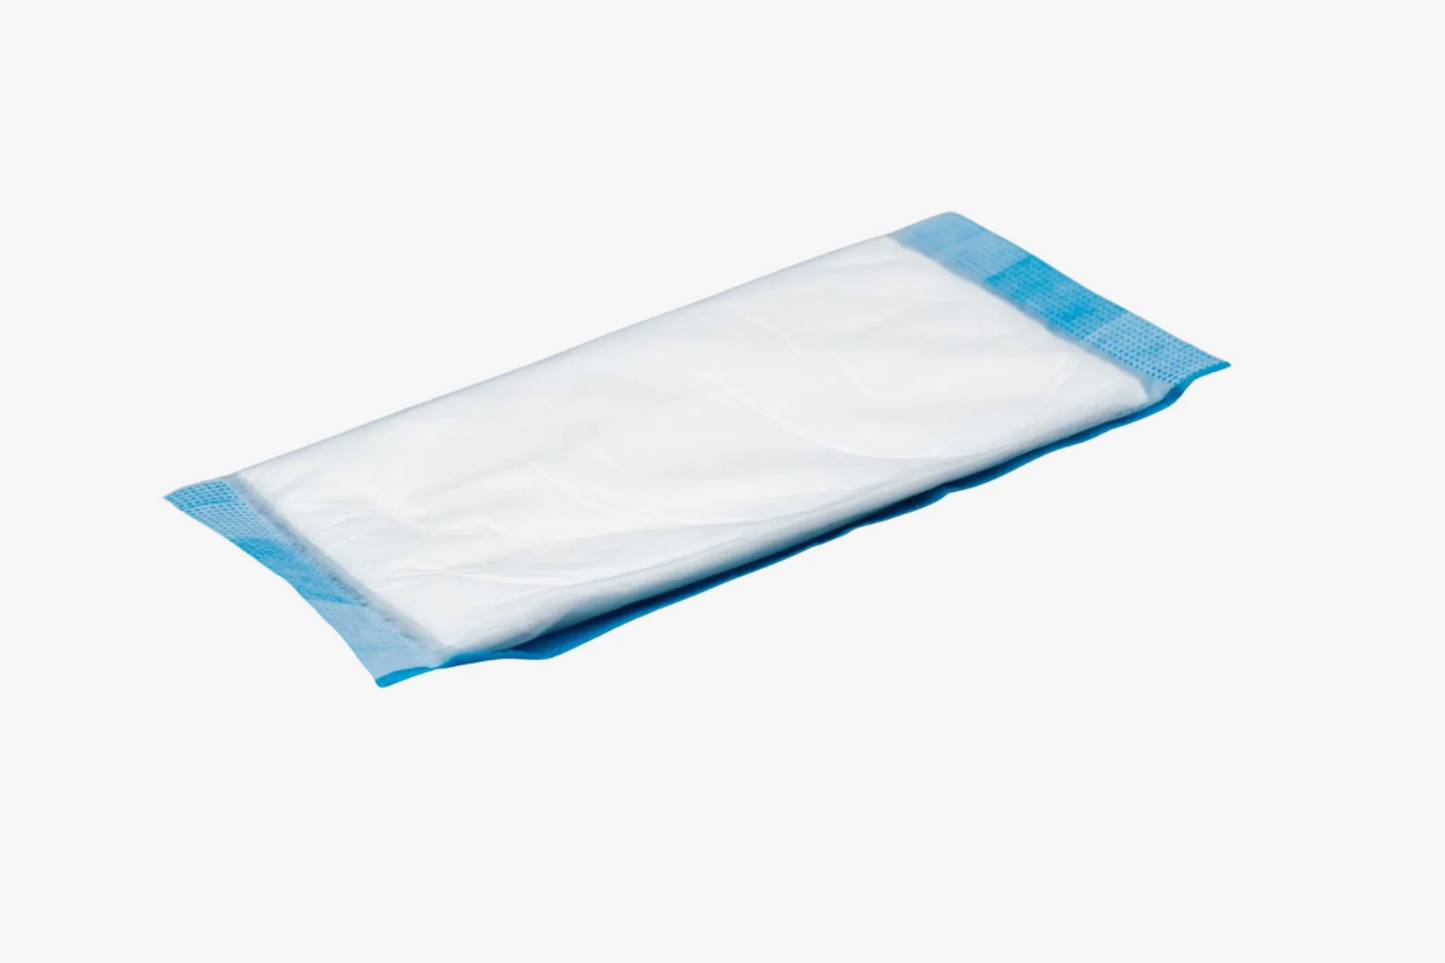 Evercare Absorbent Dressing Sterile 10 x 20 cm